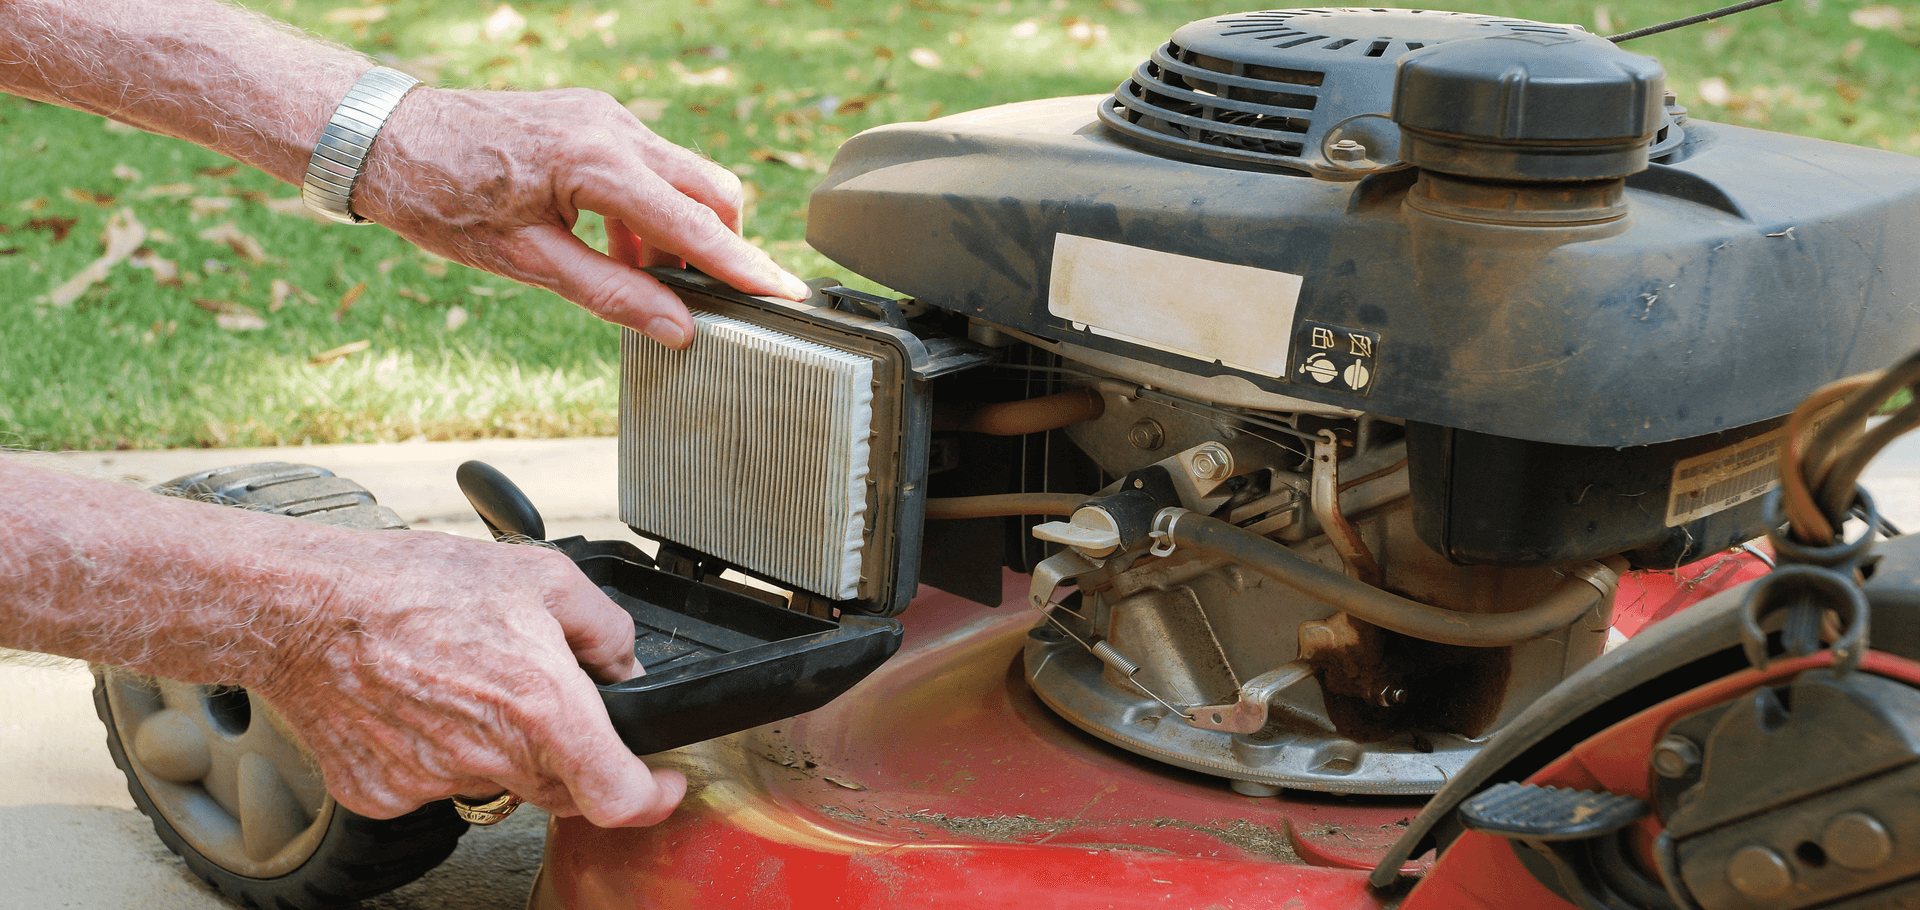 How to clean lawn mower air filter